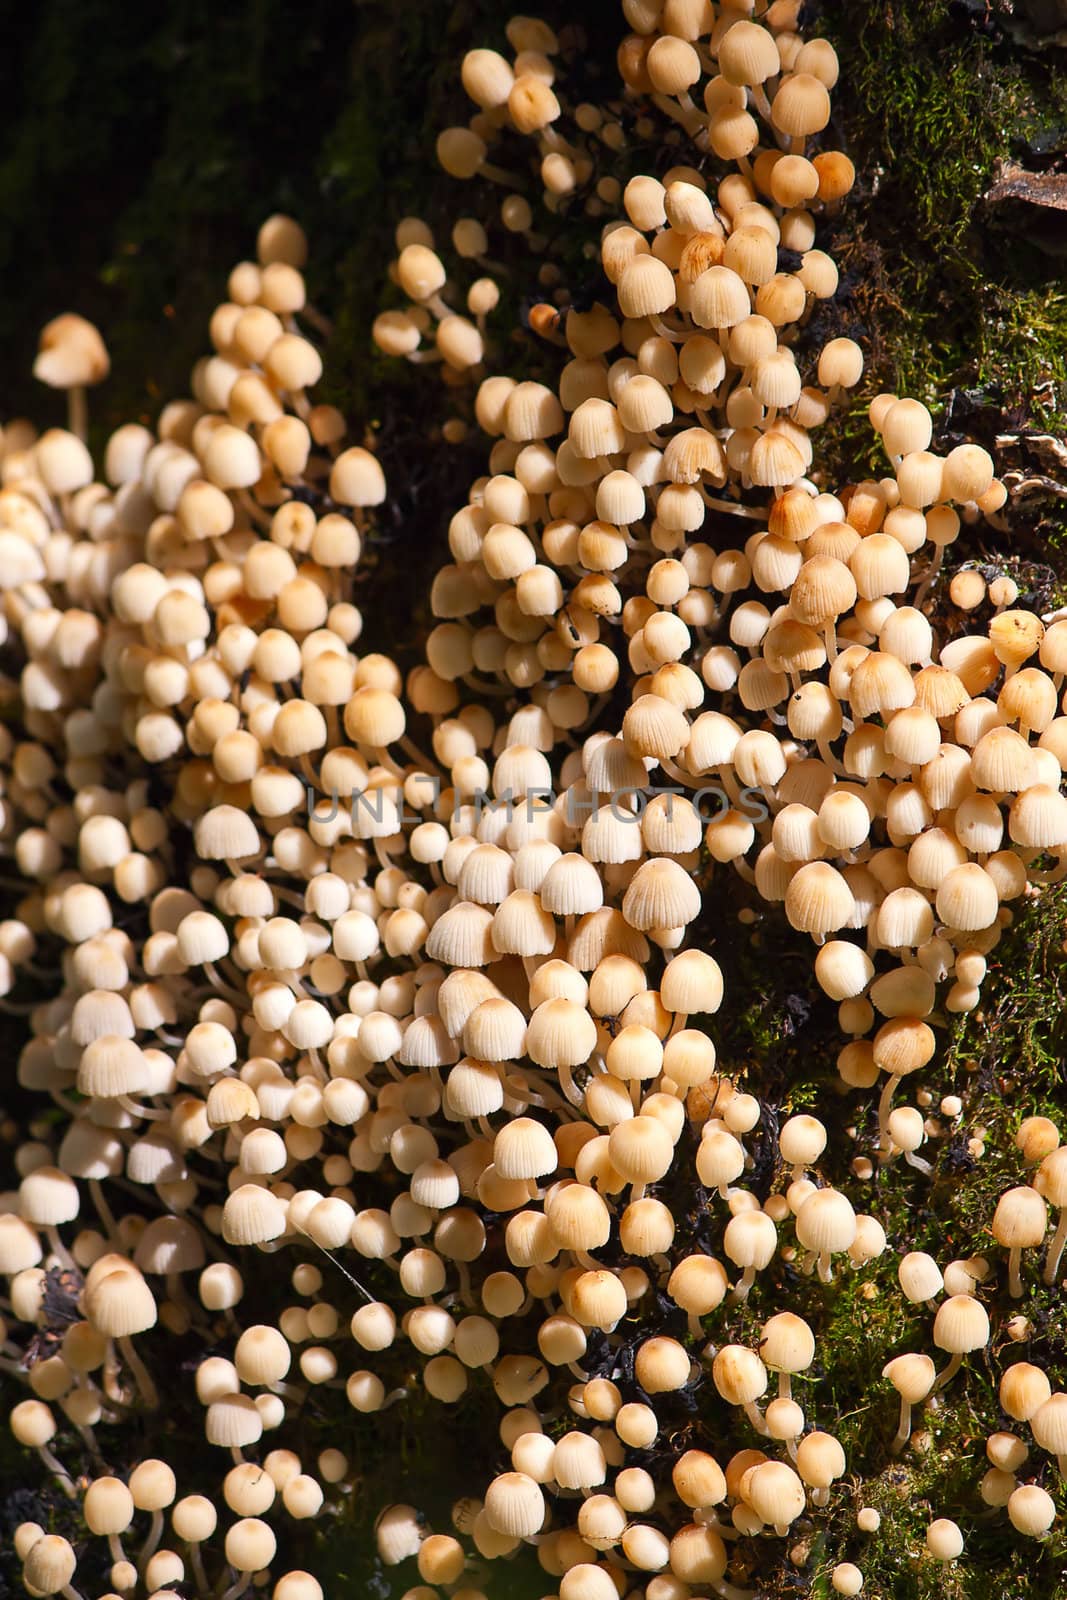 Lot of small mushrooms close up against  grass.